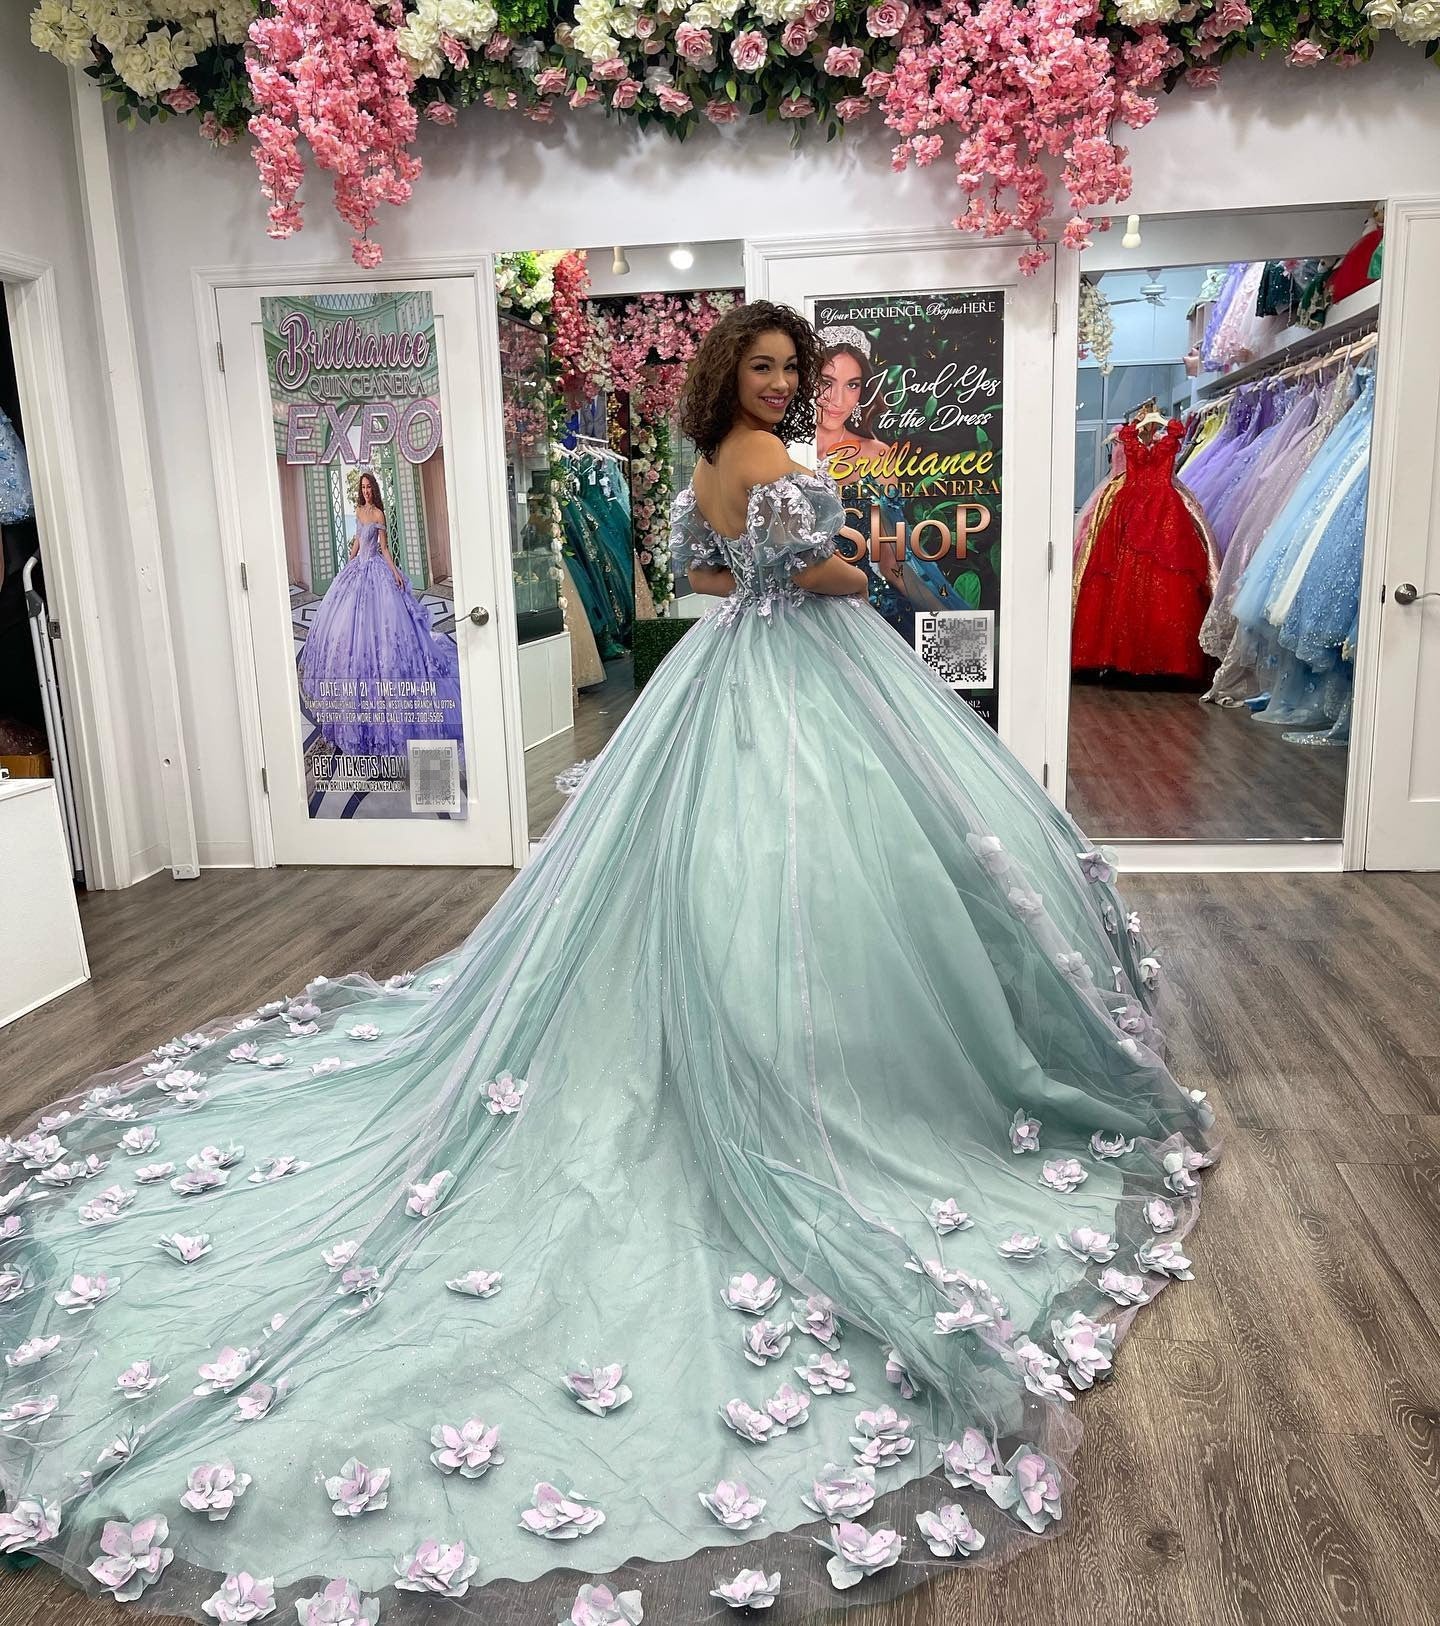 Strapless Sweetheart Quinceanera Dresses Corset Ball Gown with Puff Sleeves 3D Flowers Lace Appliques Beaded Tulle Sweet 15 16 Dresses Party Gowns with Train